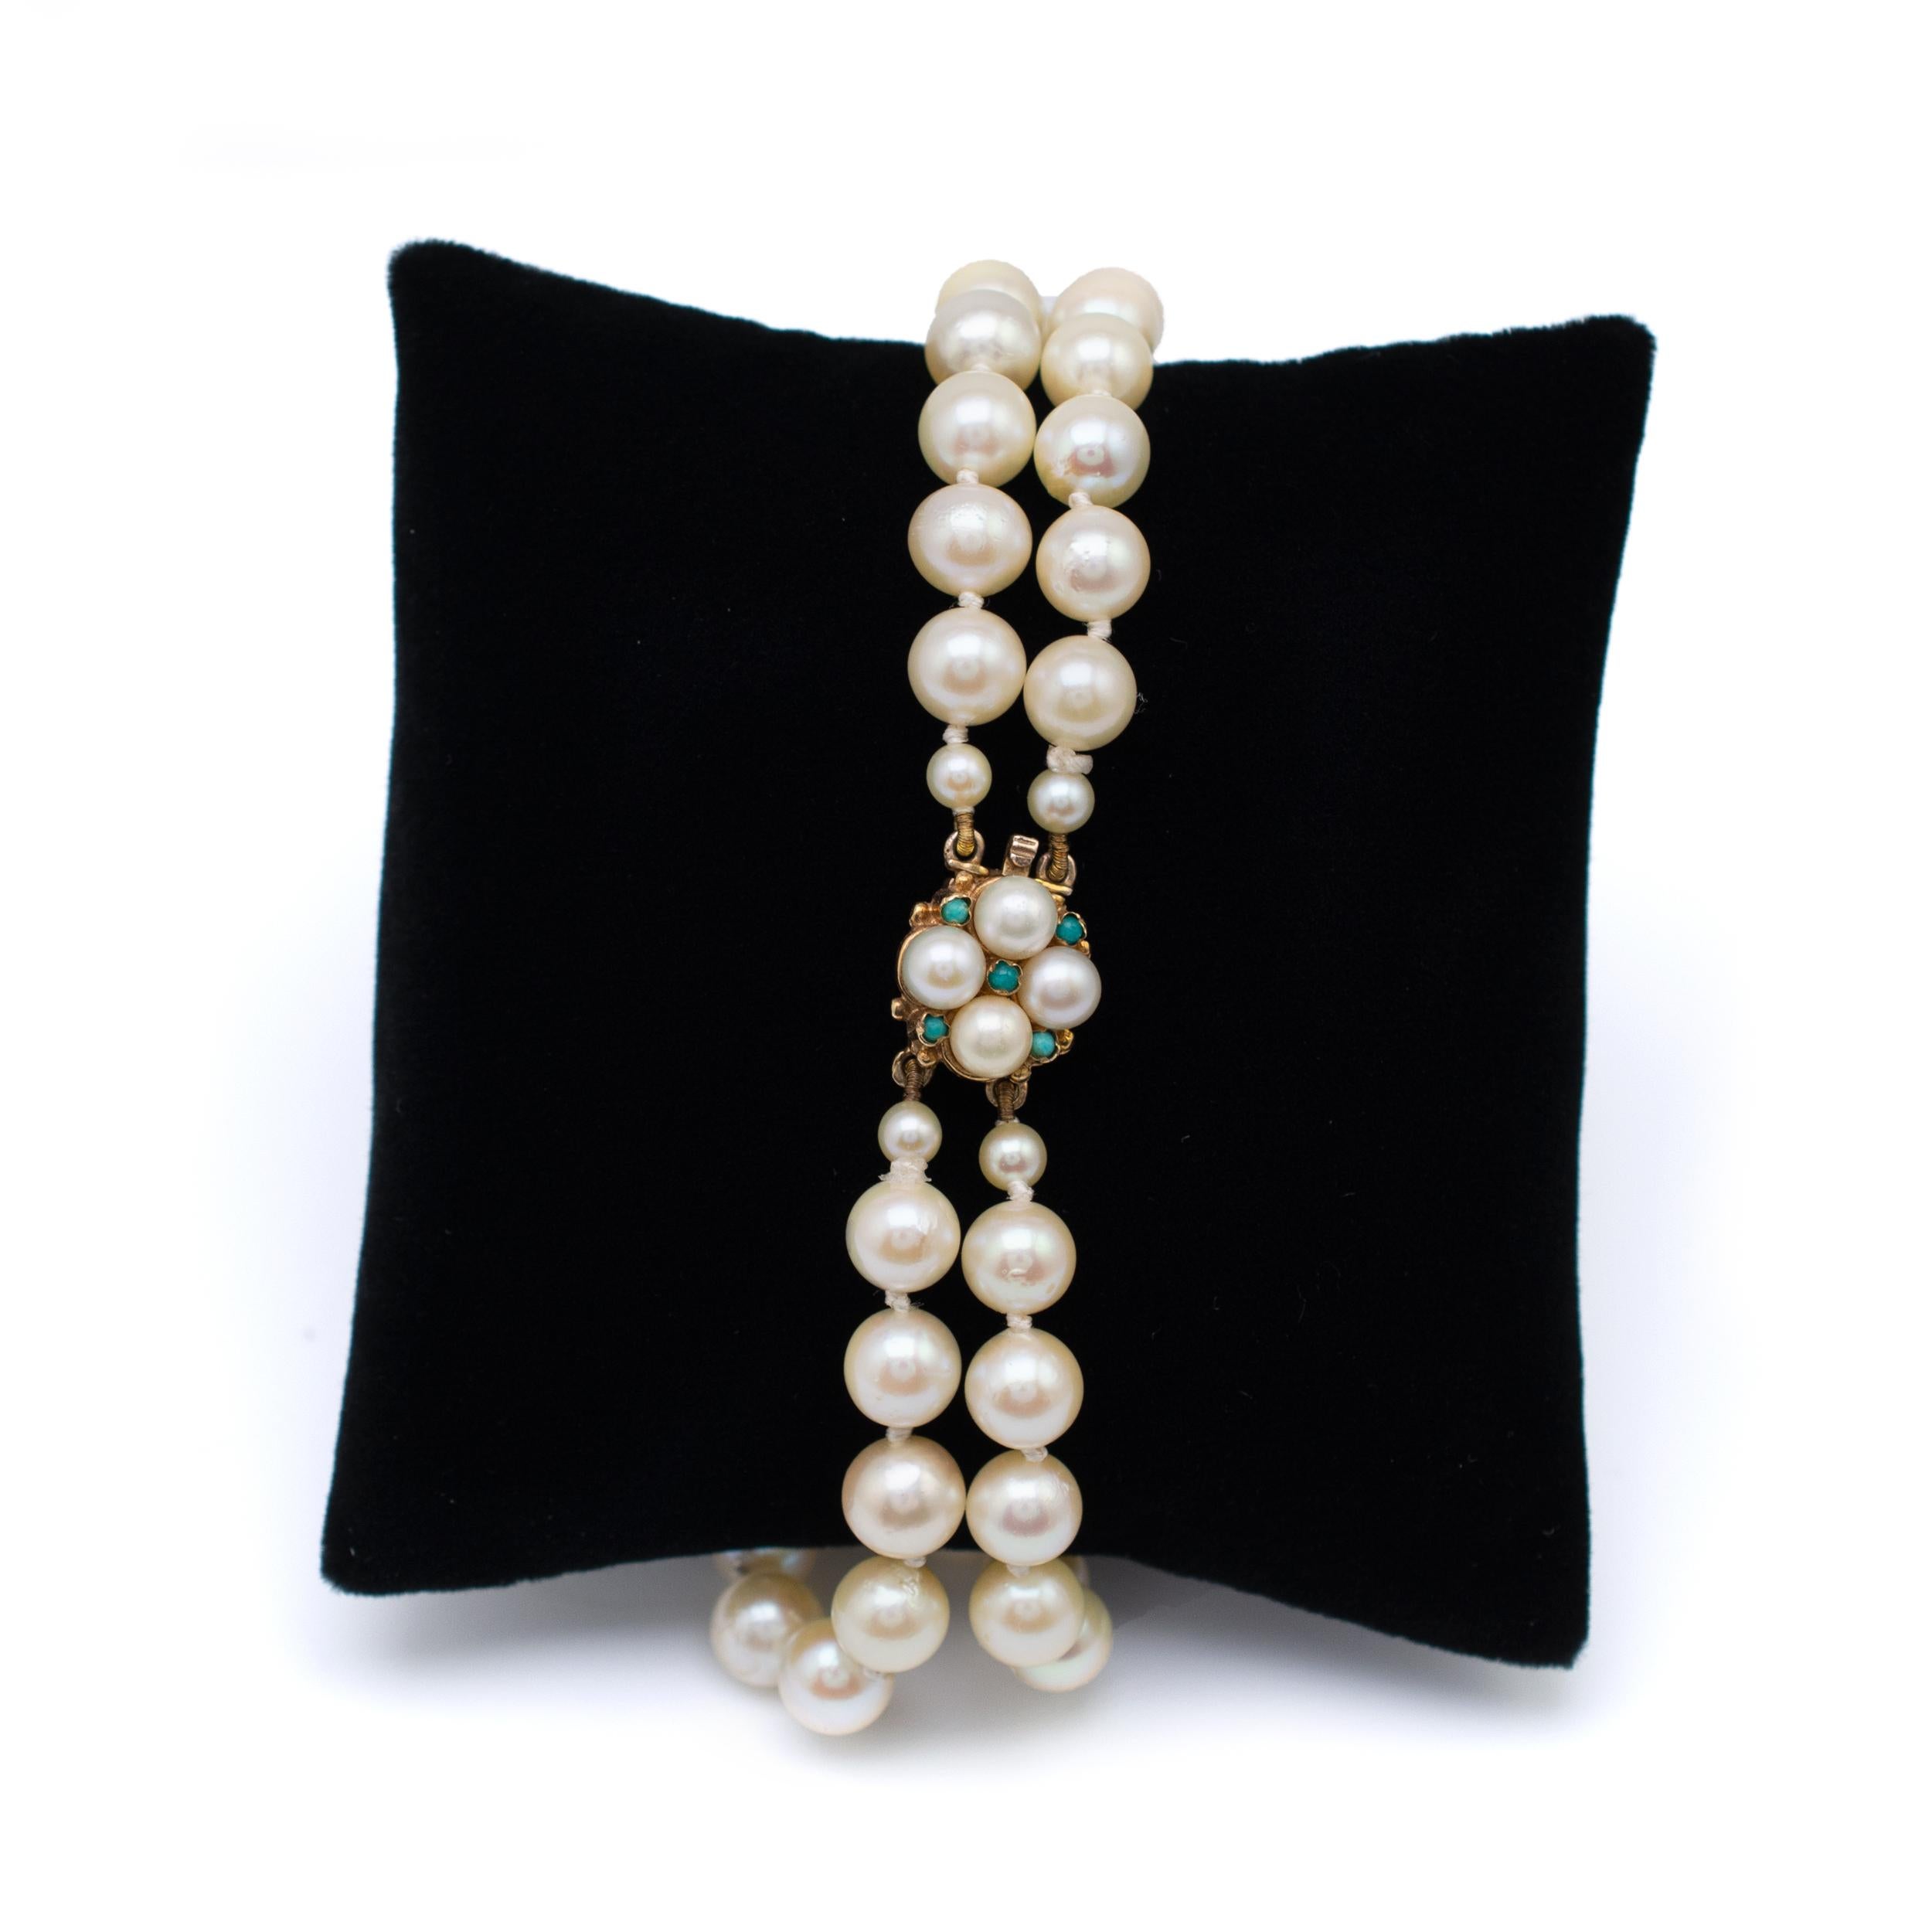 Vintage Double Strand Pearl Turquoise Bracelet Gold Clasp circa 1970s For Sale 3